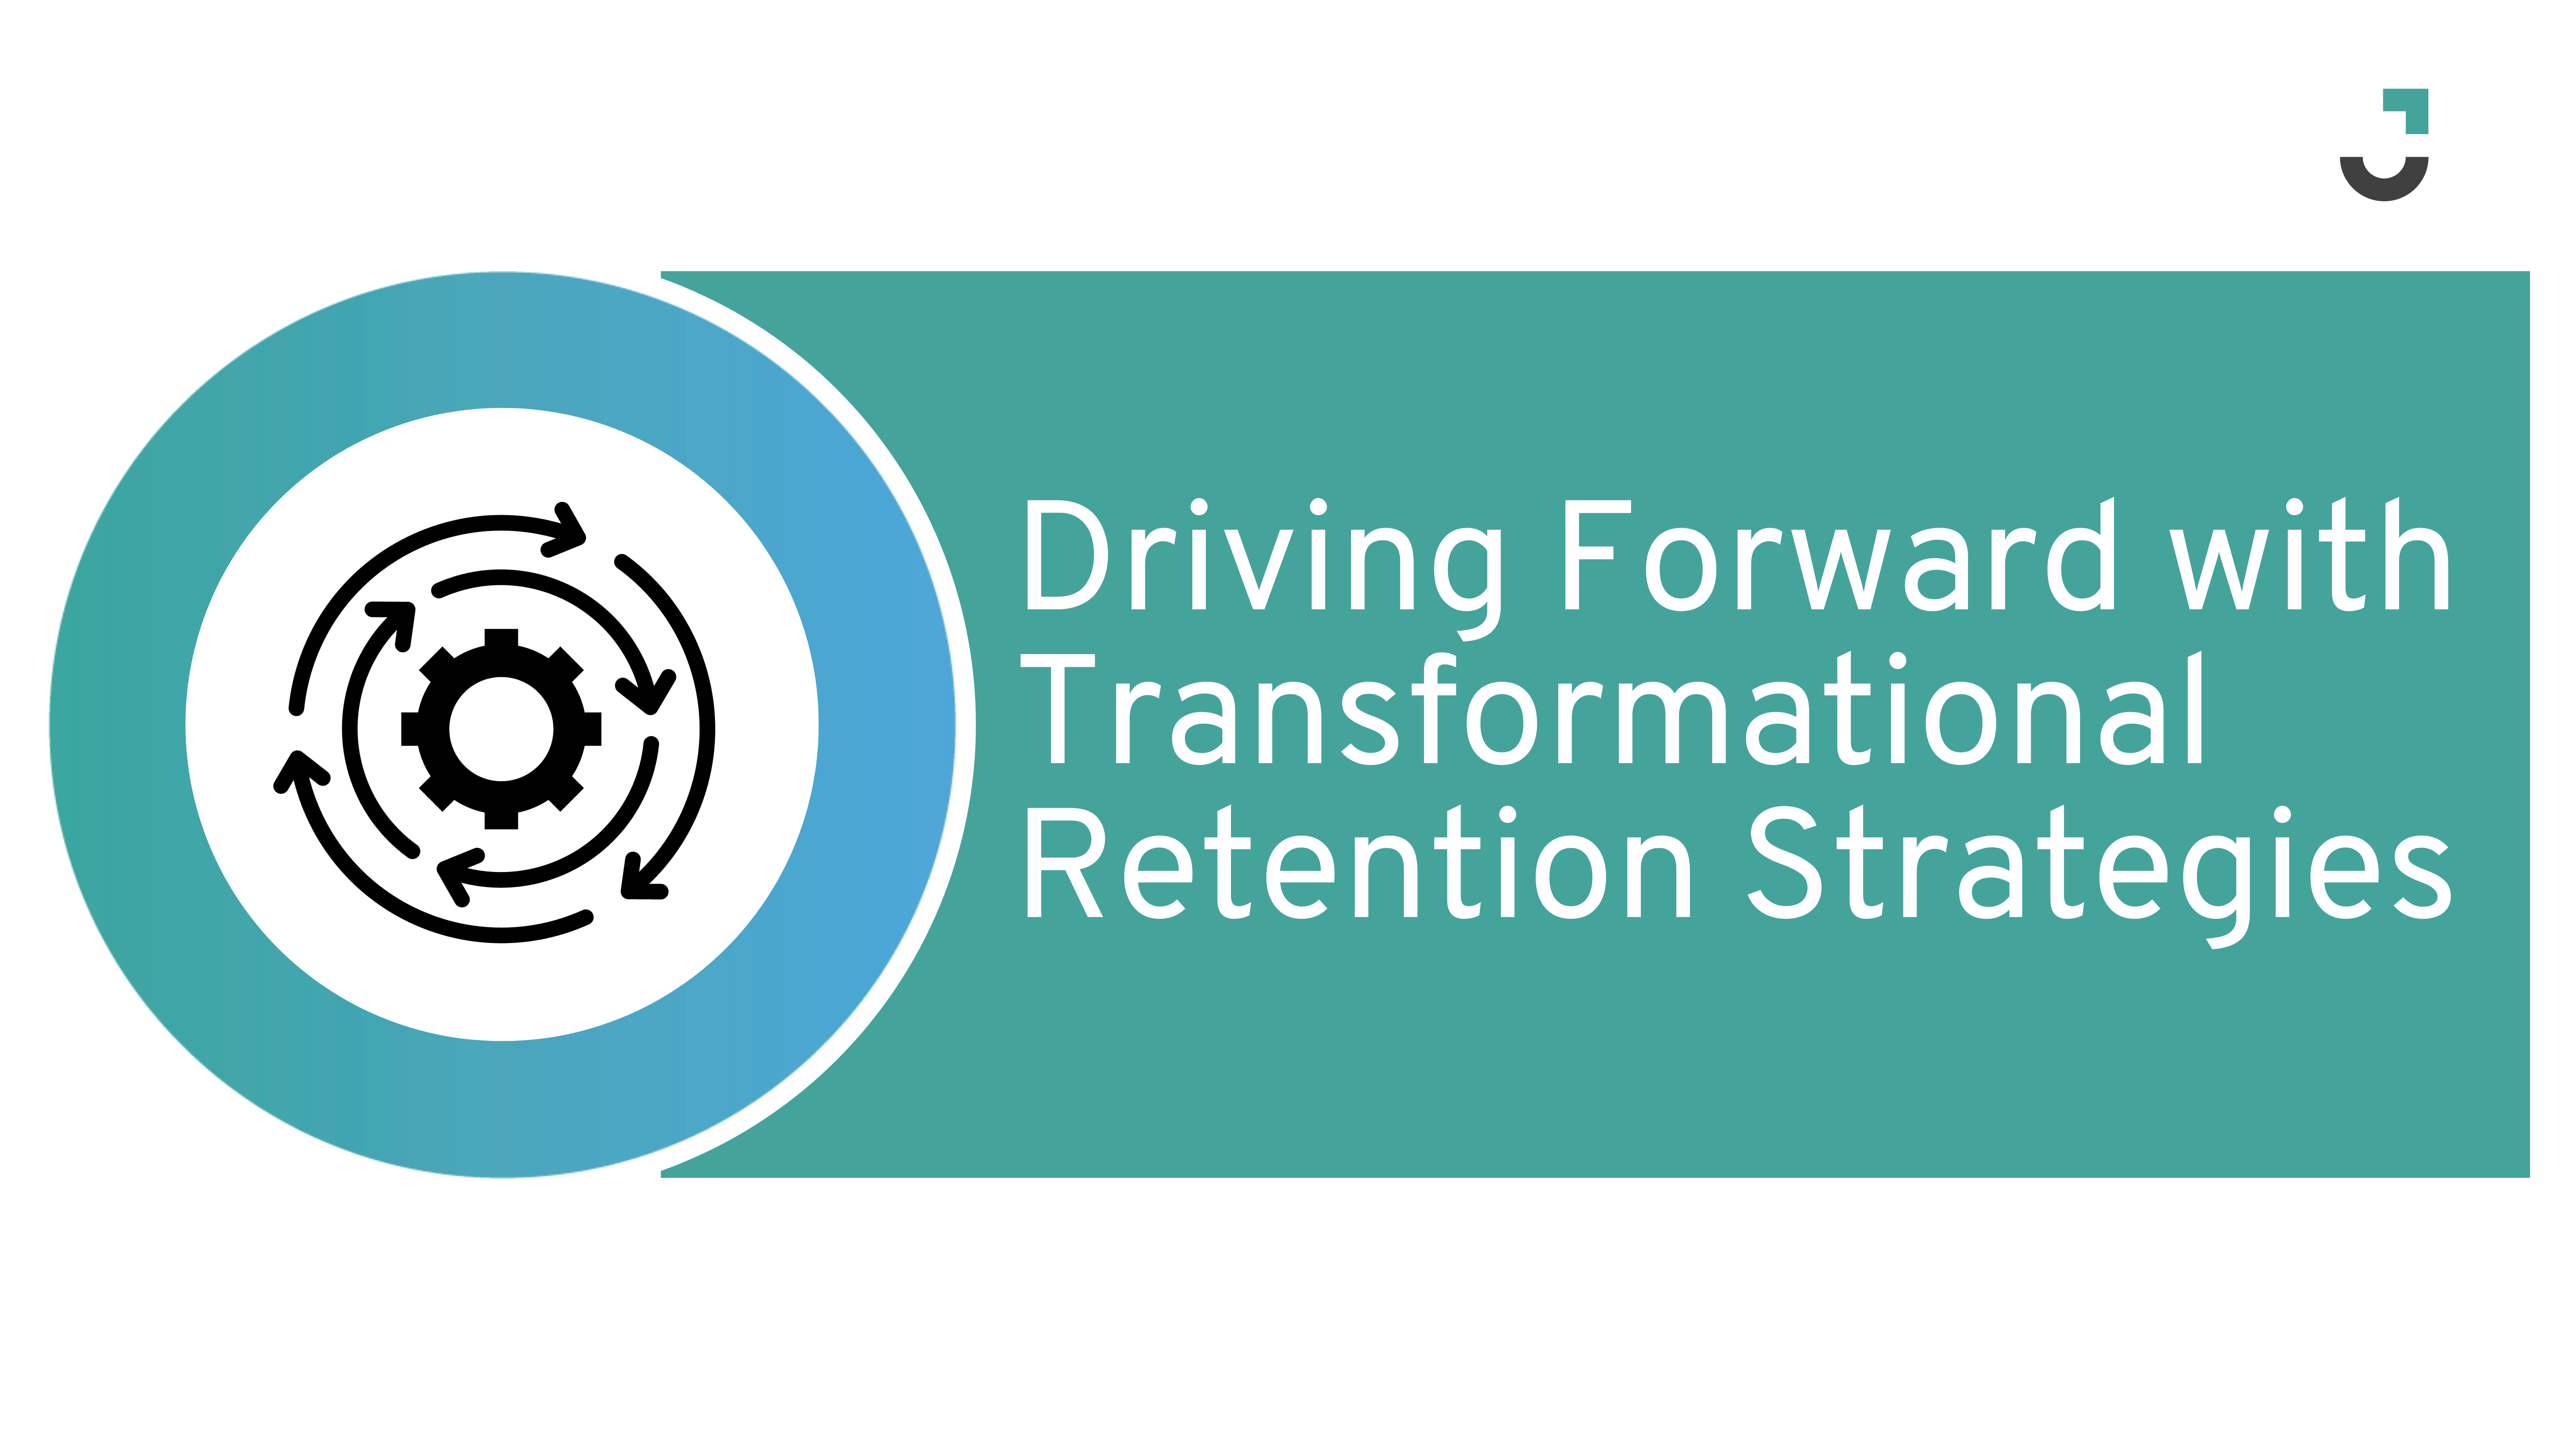 Driving Forward with Transformational Retention Strategies